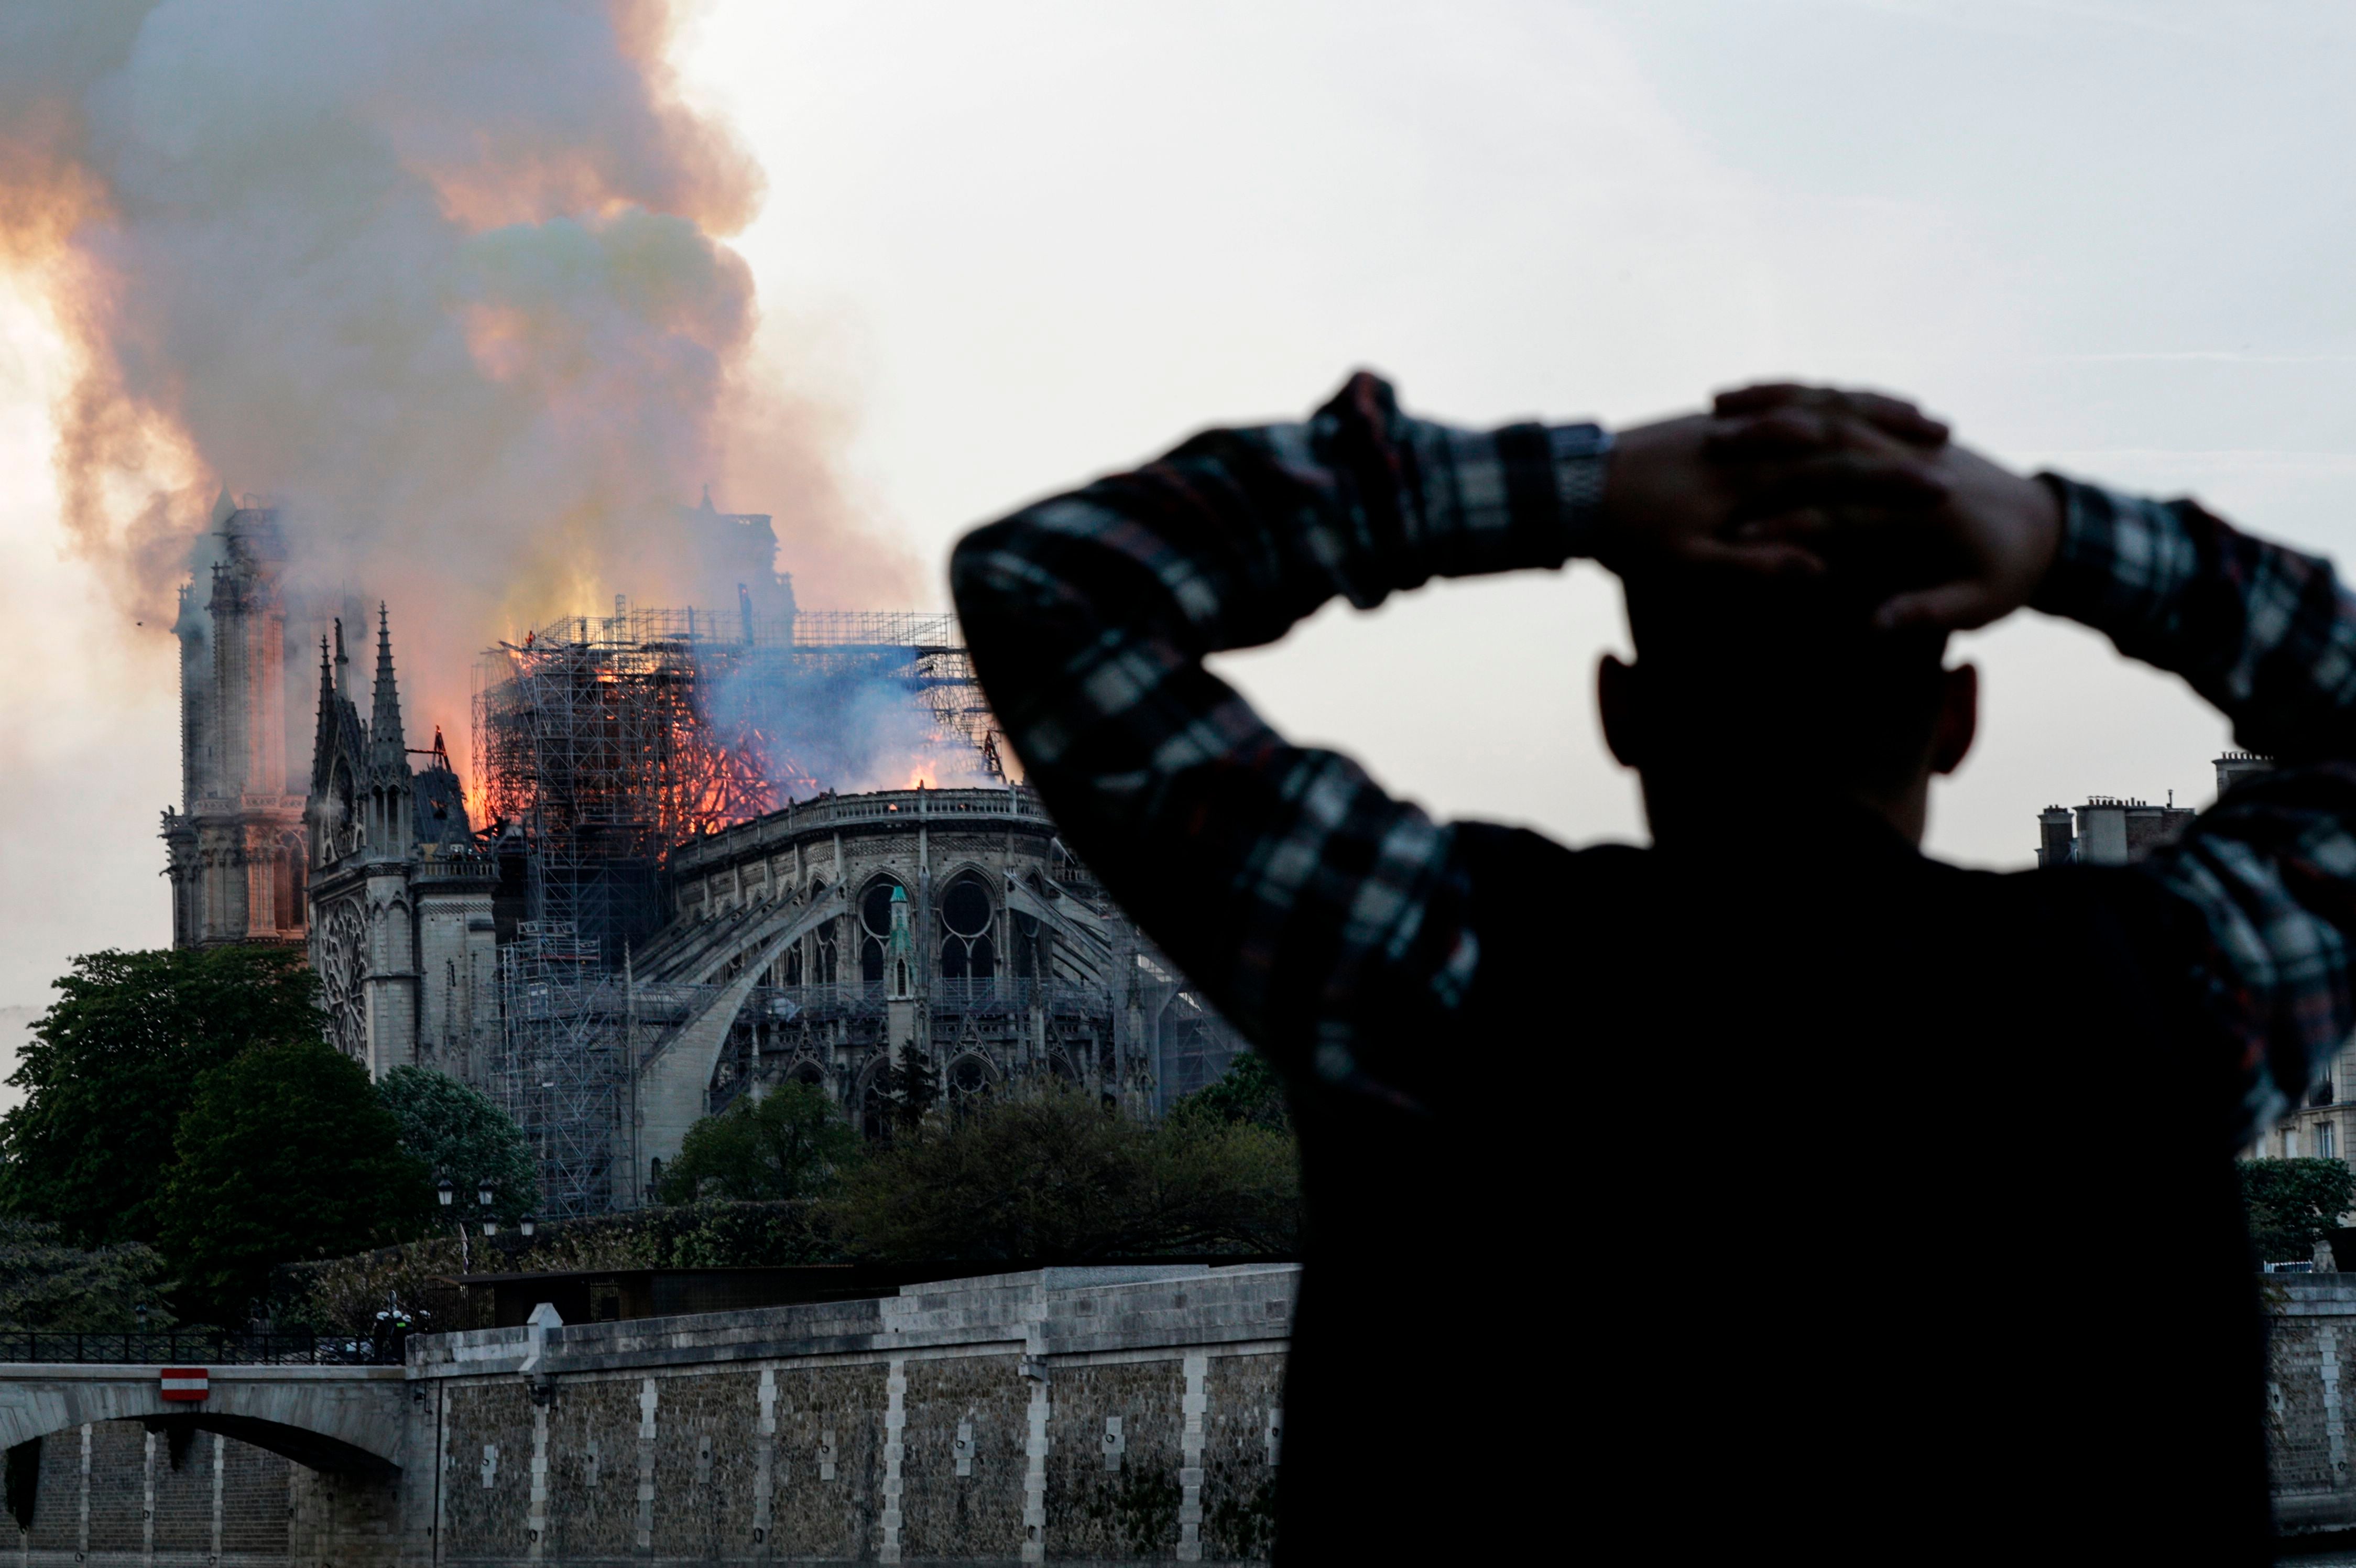 A bystander watches in despair as flames engulf the roof on 15 April 2019